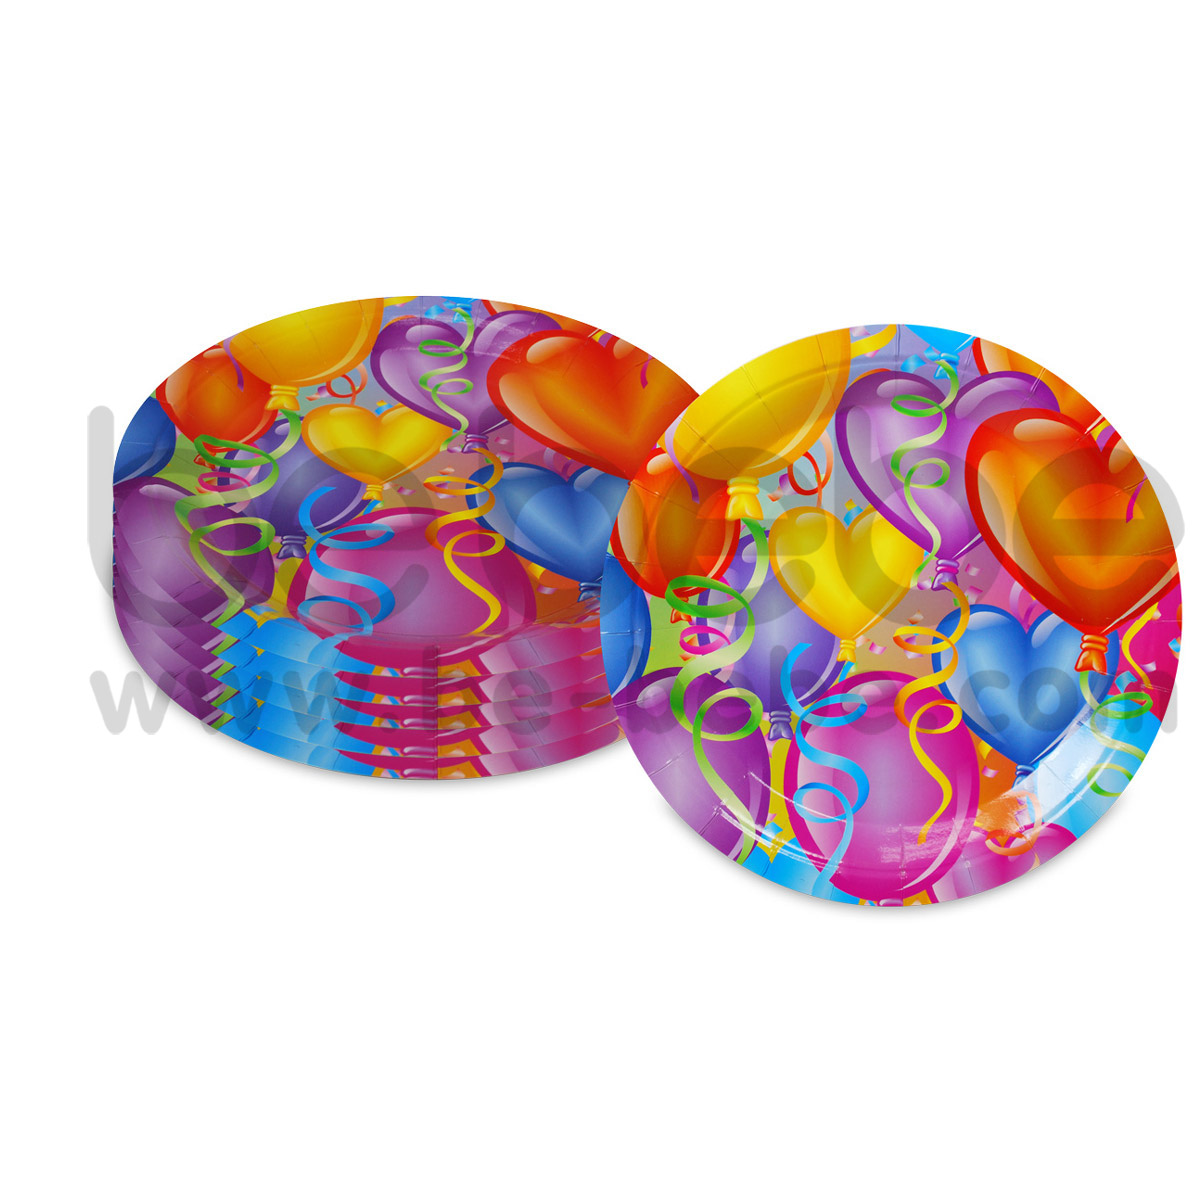 PARTY BUG : Paper plate 7 inch., 1 Pack